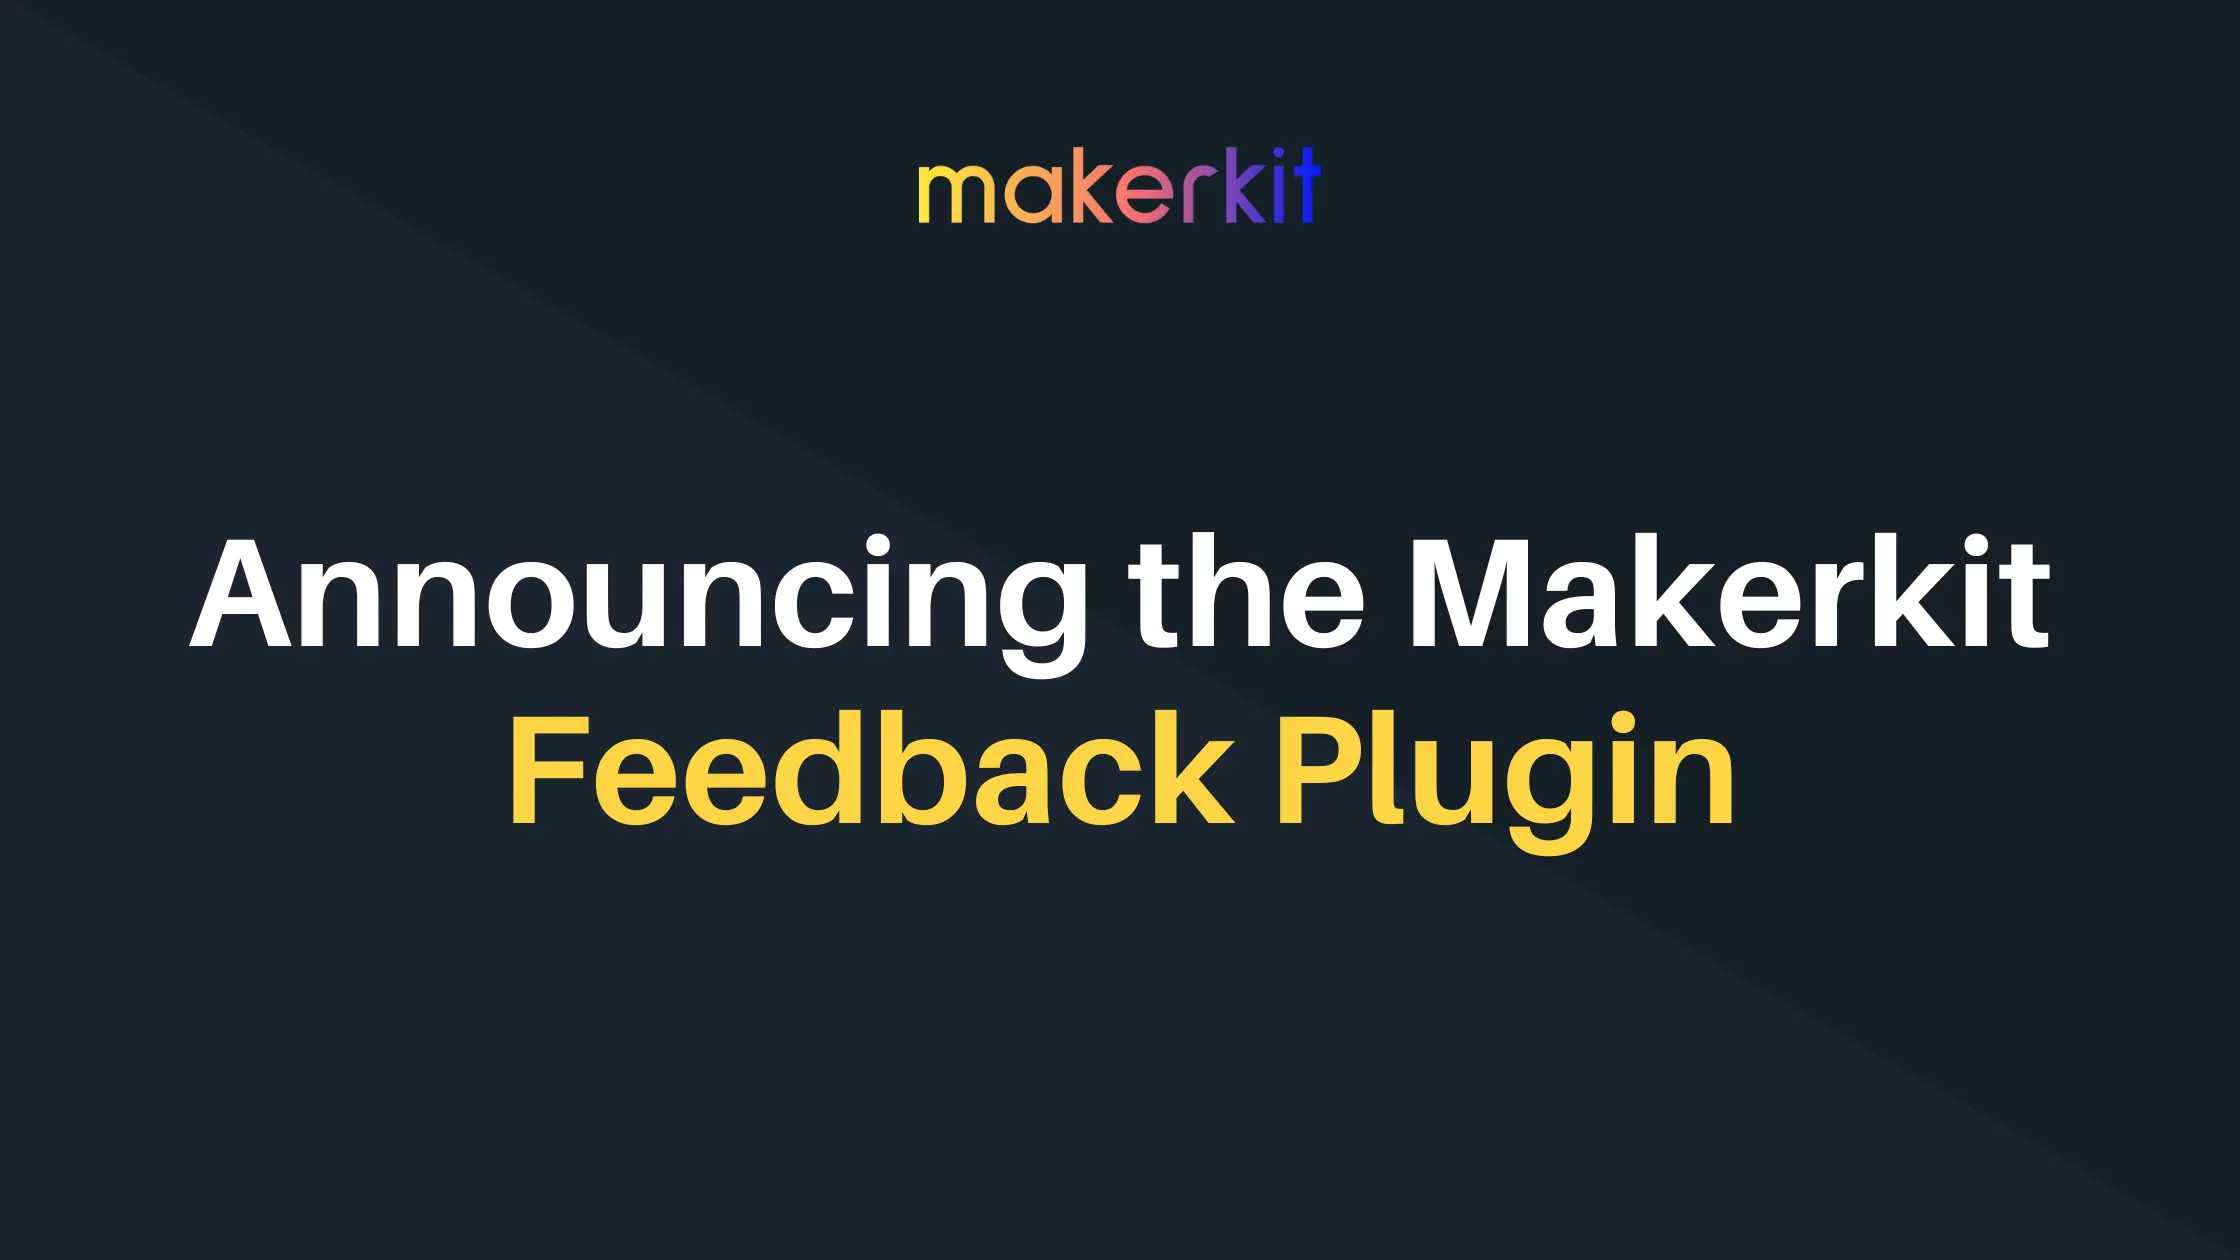 Cover Image for Announcing the Feedback plugin